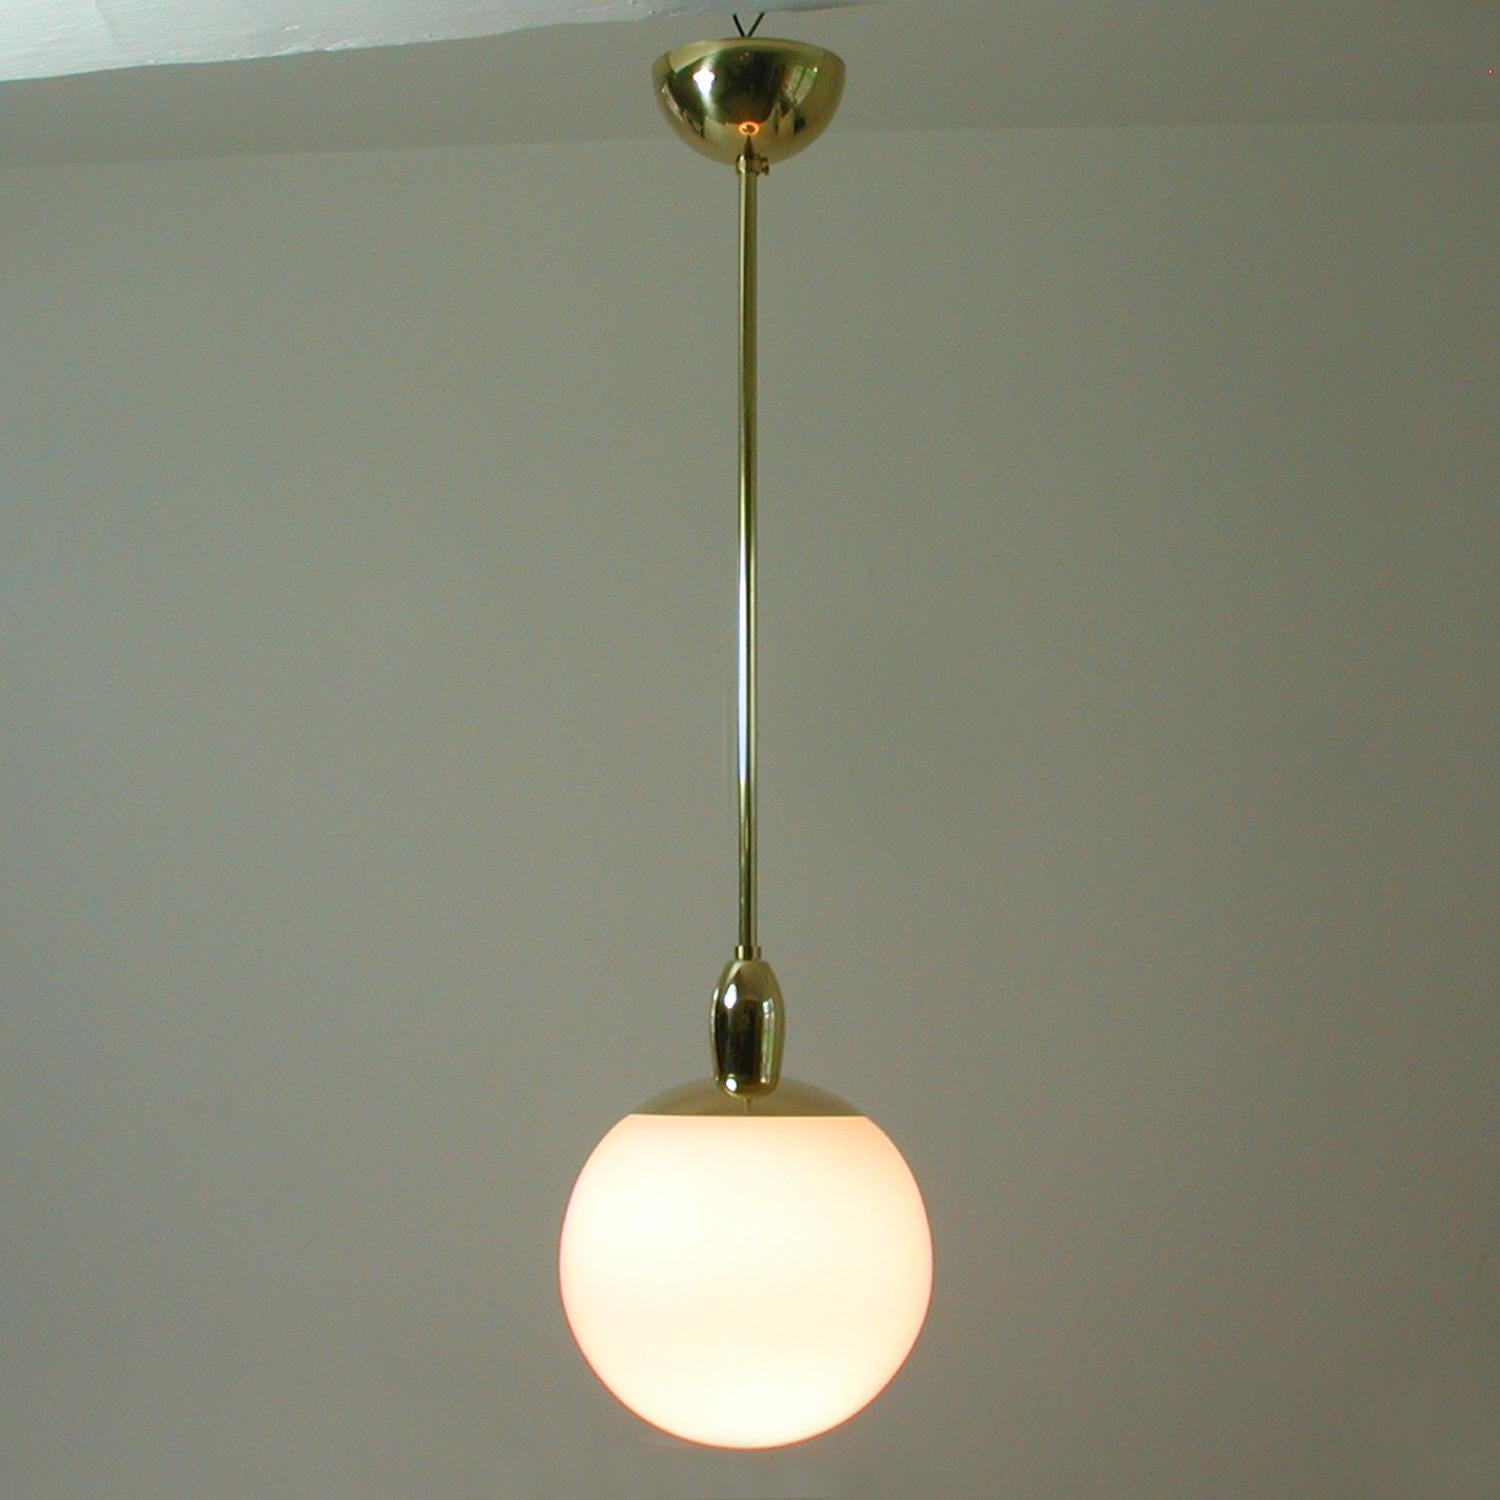 Pair of Mid-Century Modern Italian Satinated Glass and Brass Pendants, 1960s For Sale 2